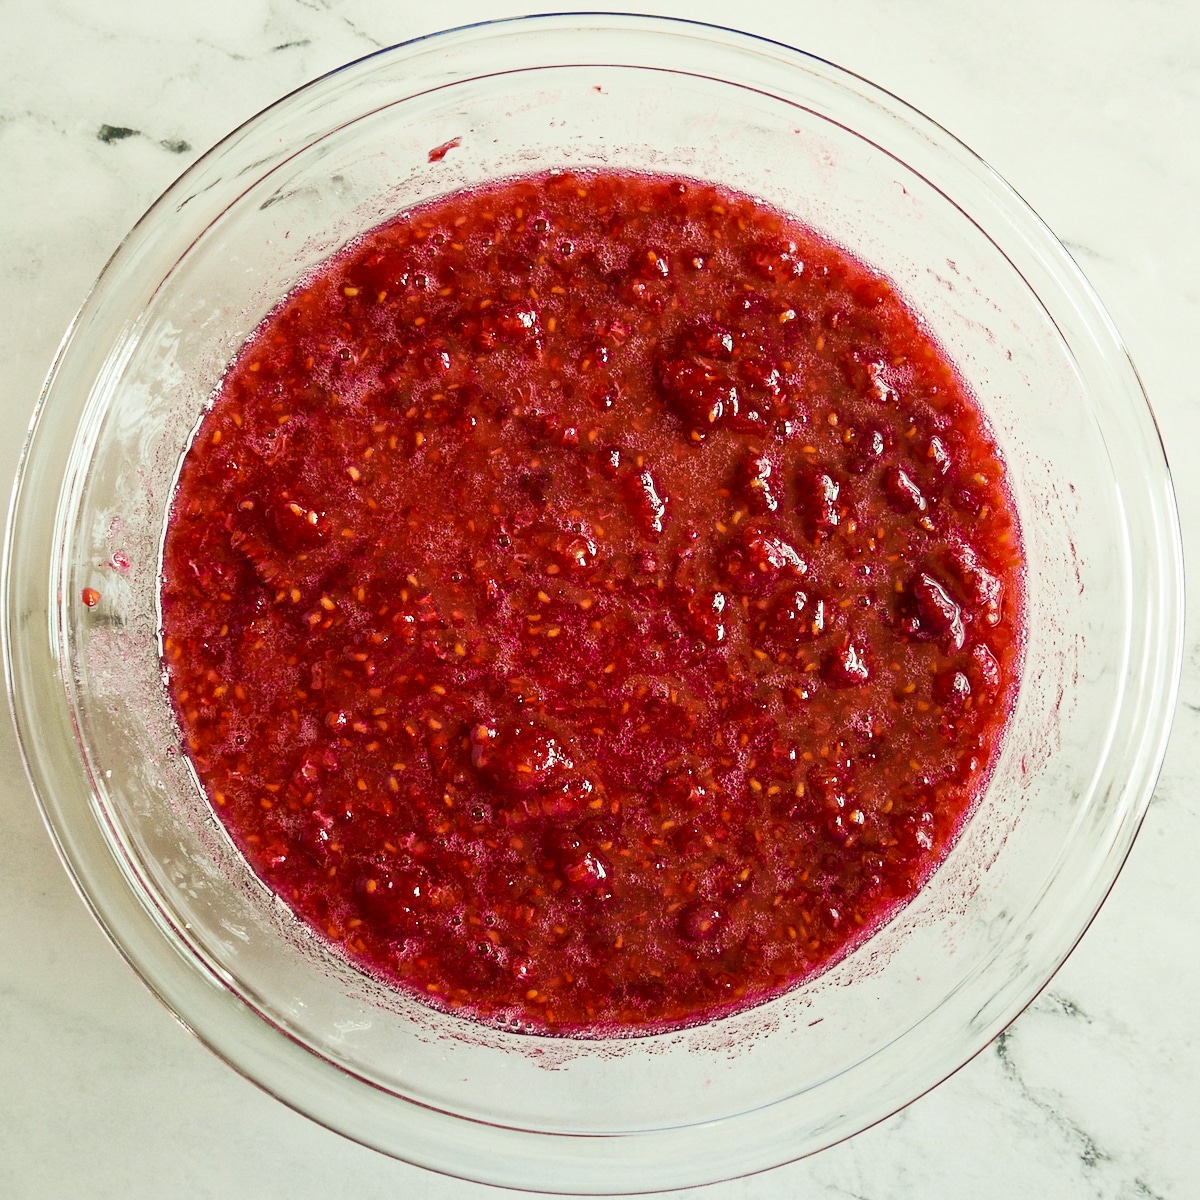 Sugar mixed into mashed raspberries in a large bowl.